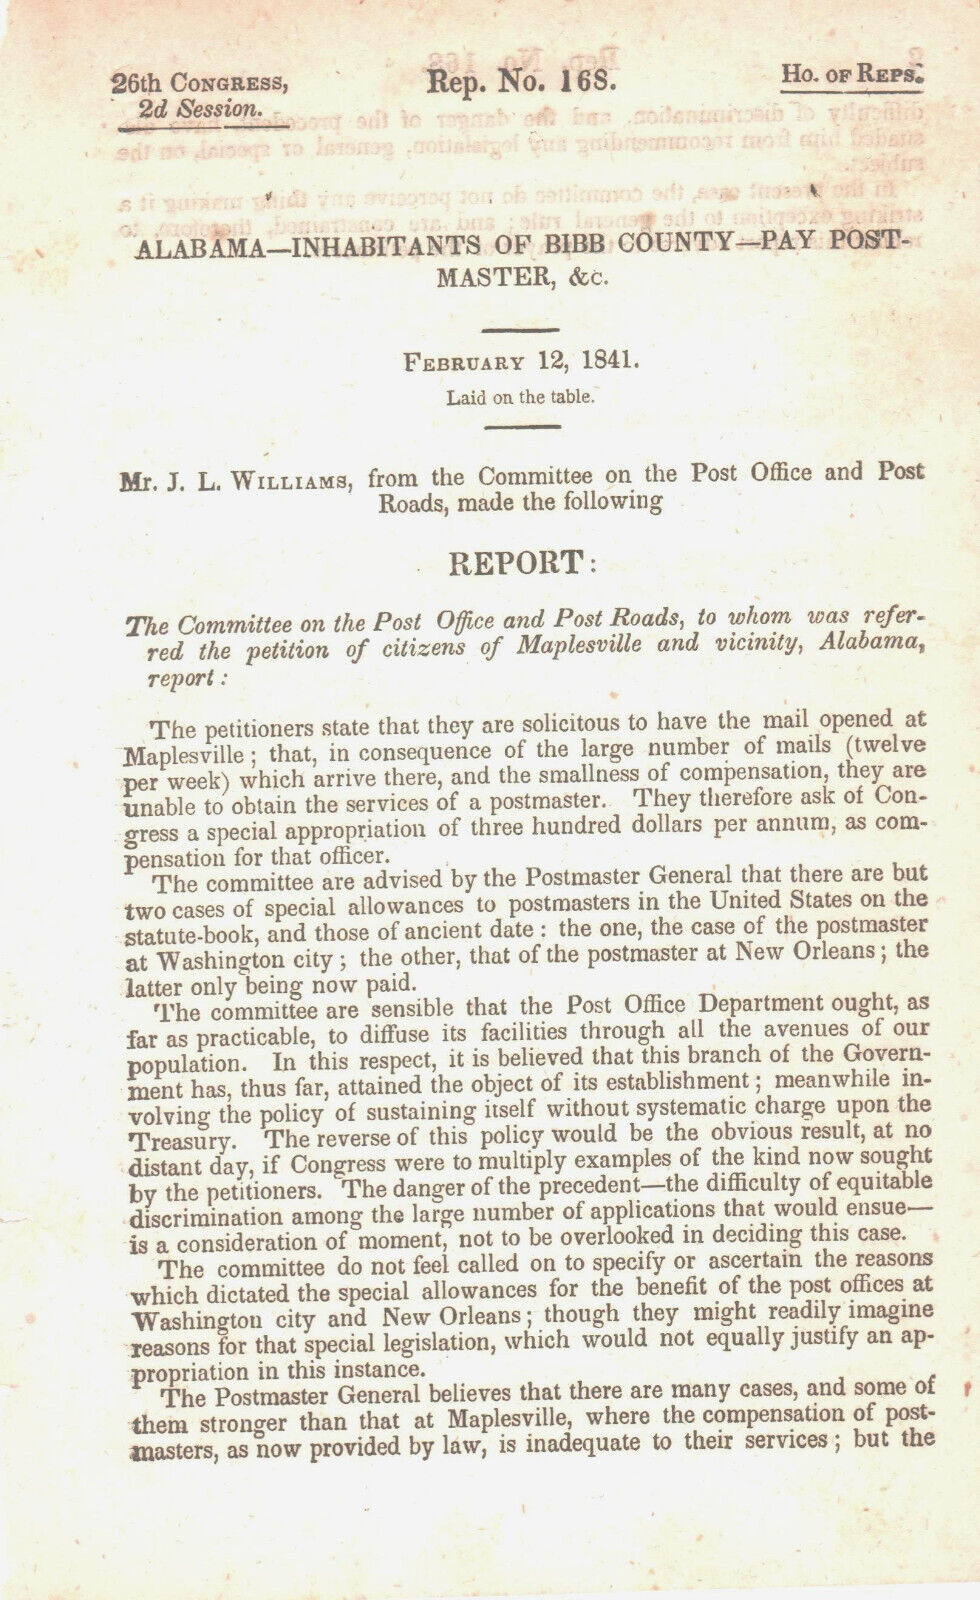 1841 Petition to Congress for Money to pay Postmaster in Maplesville, Alabama